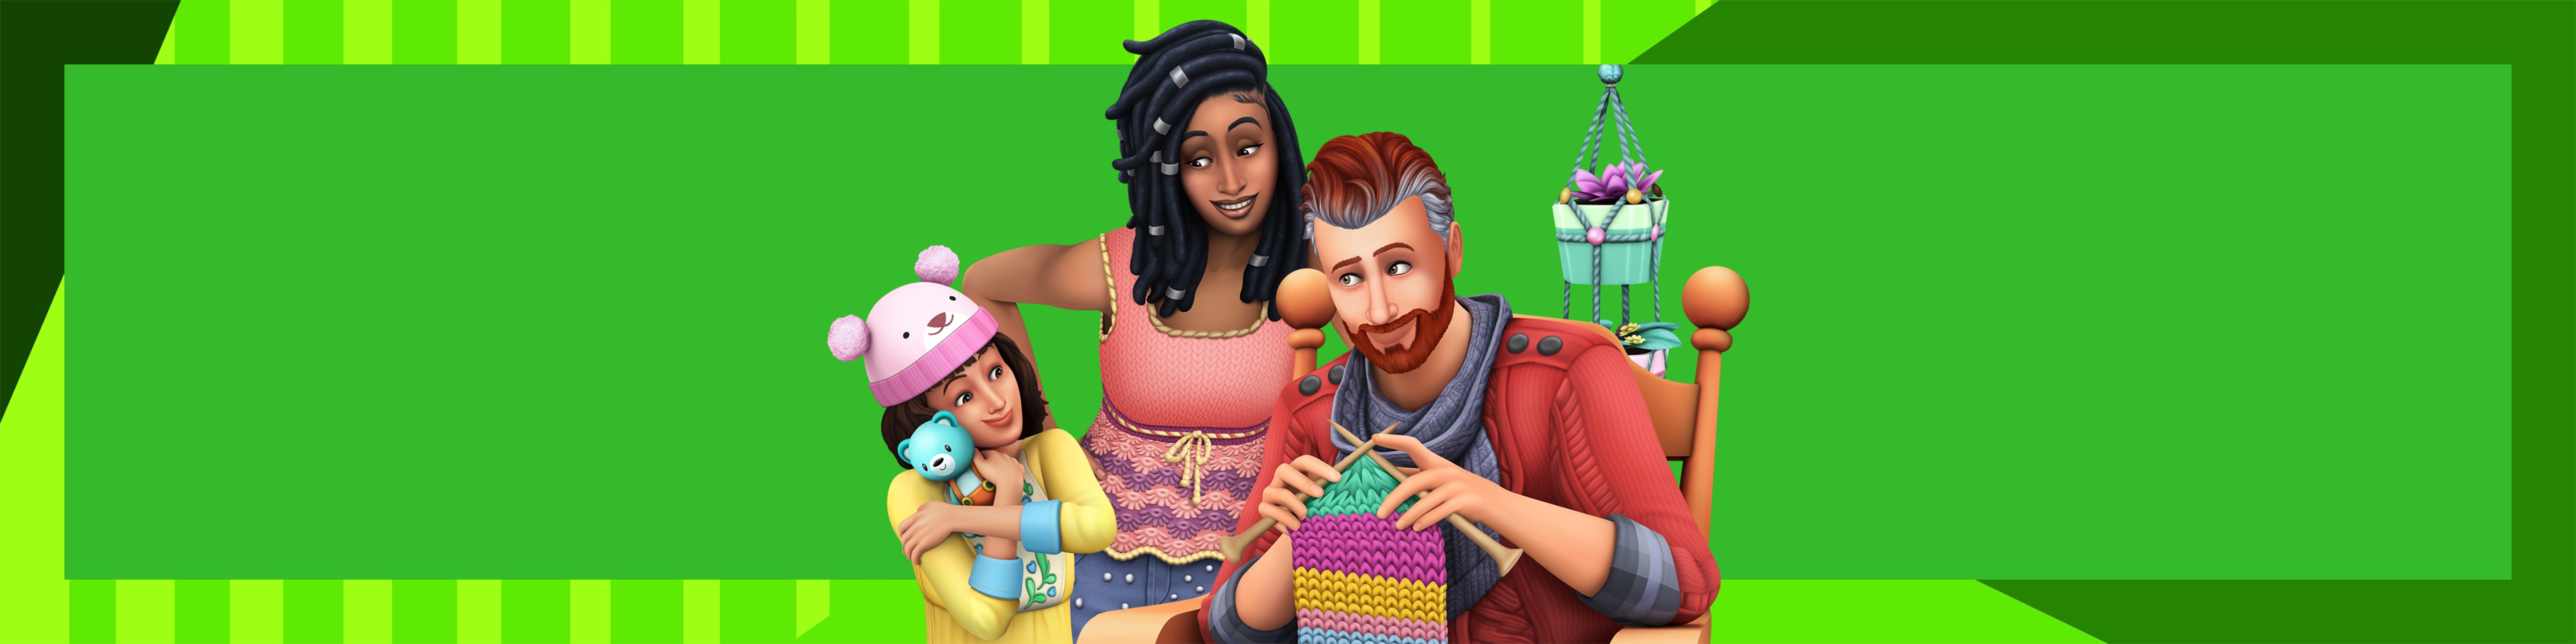 The Sims™ 4 Nifty Knitting Stuff Pack for PC/Mac